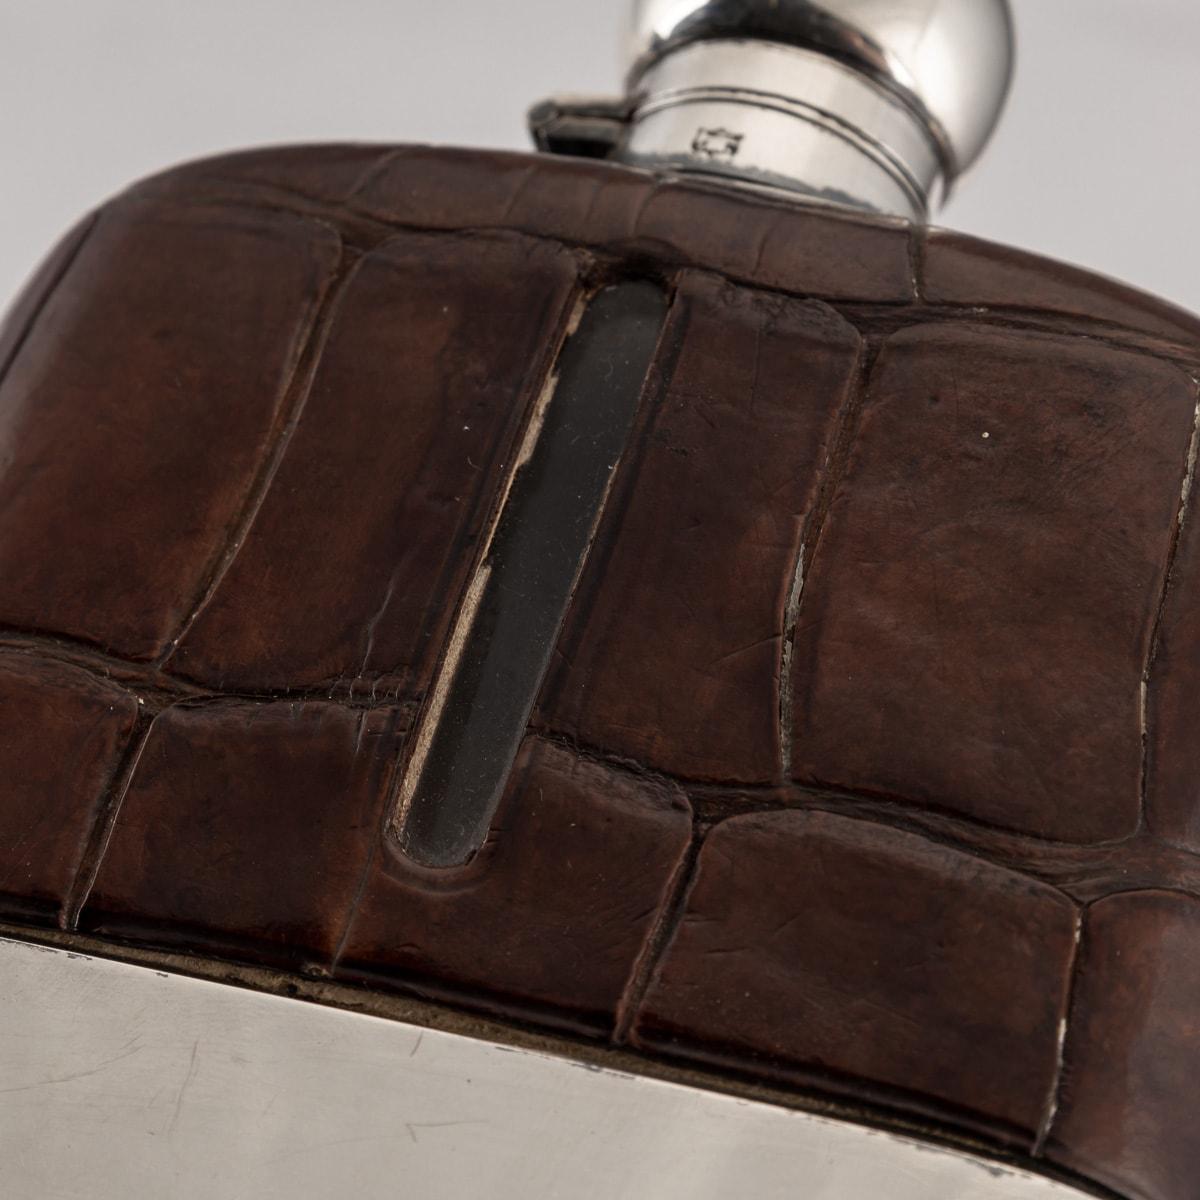 20th Century Silver Plated & Leather Hip Flask, James Dixon & Sons, c.1900 For Sale 4